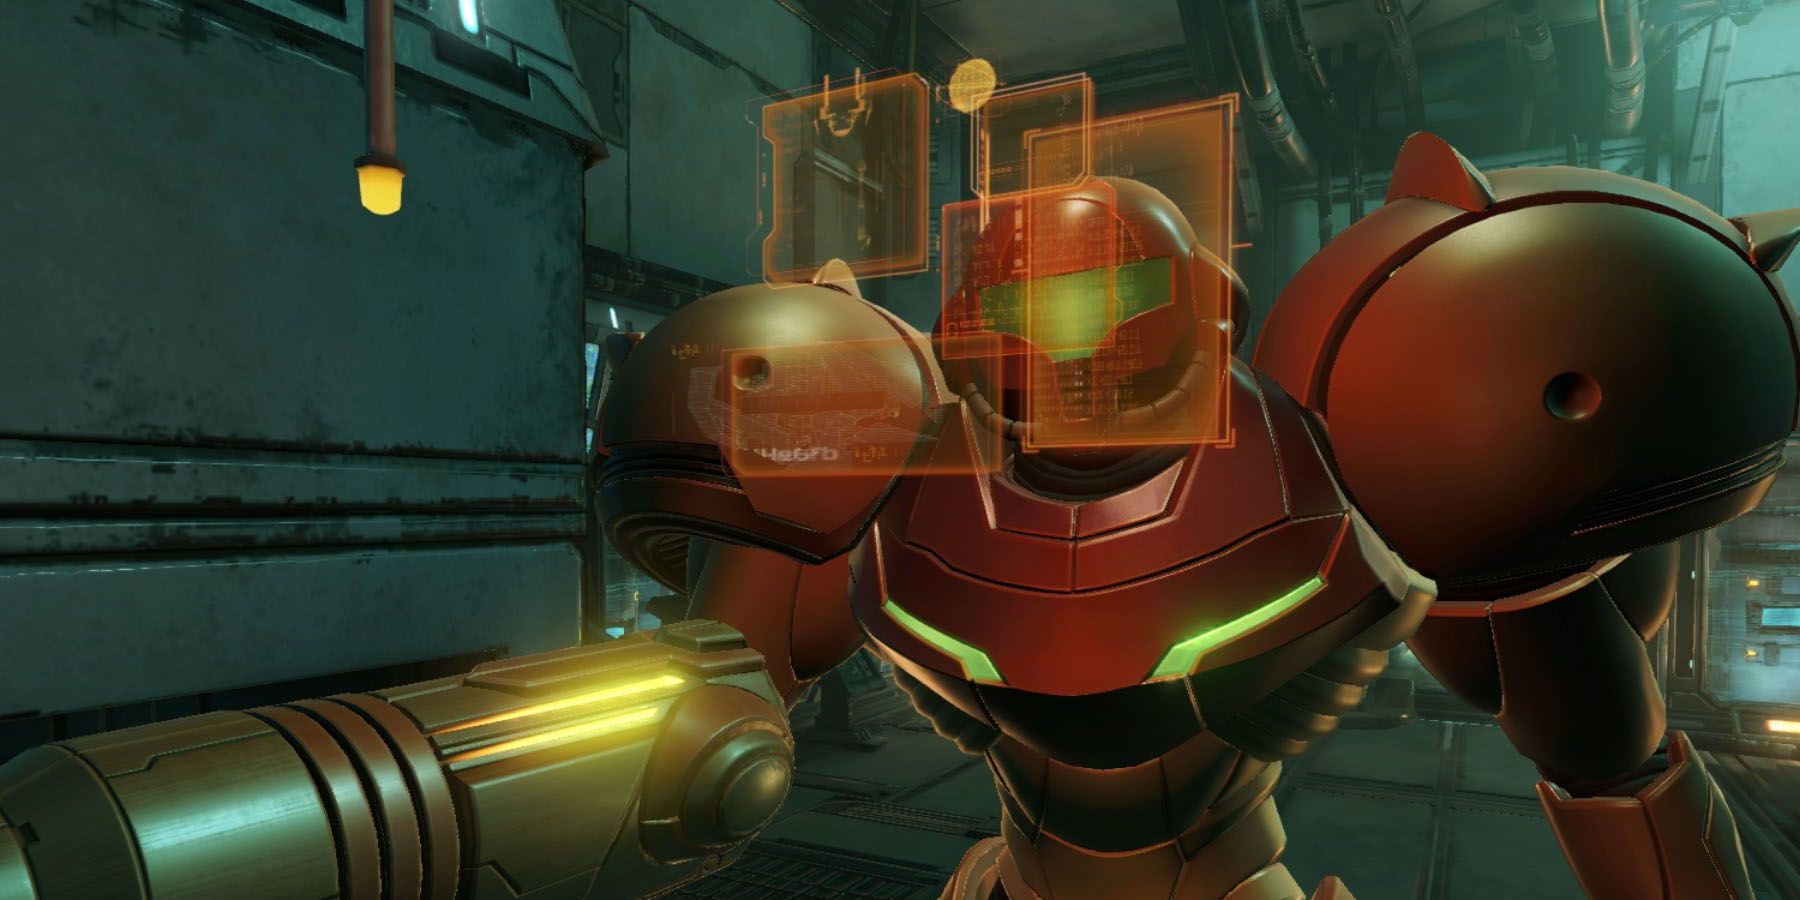 A screenshot of Samus viewing data on a hologram in front of her helmet in Metroid Prime.